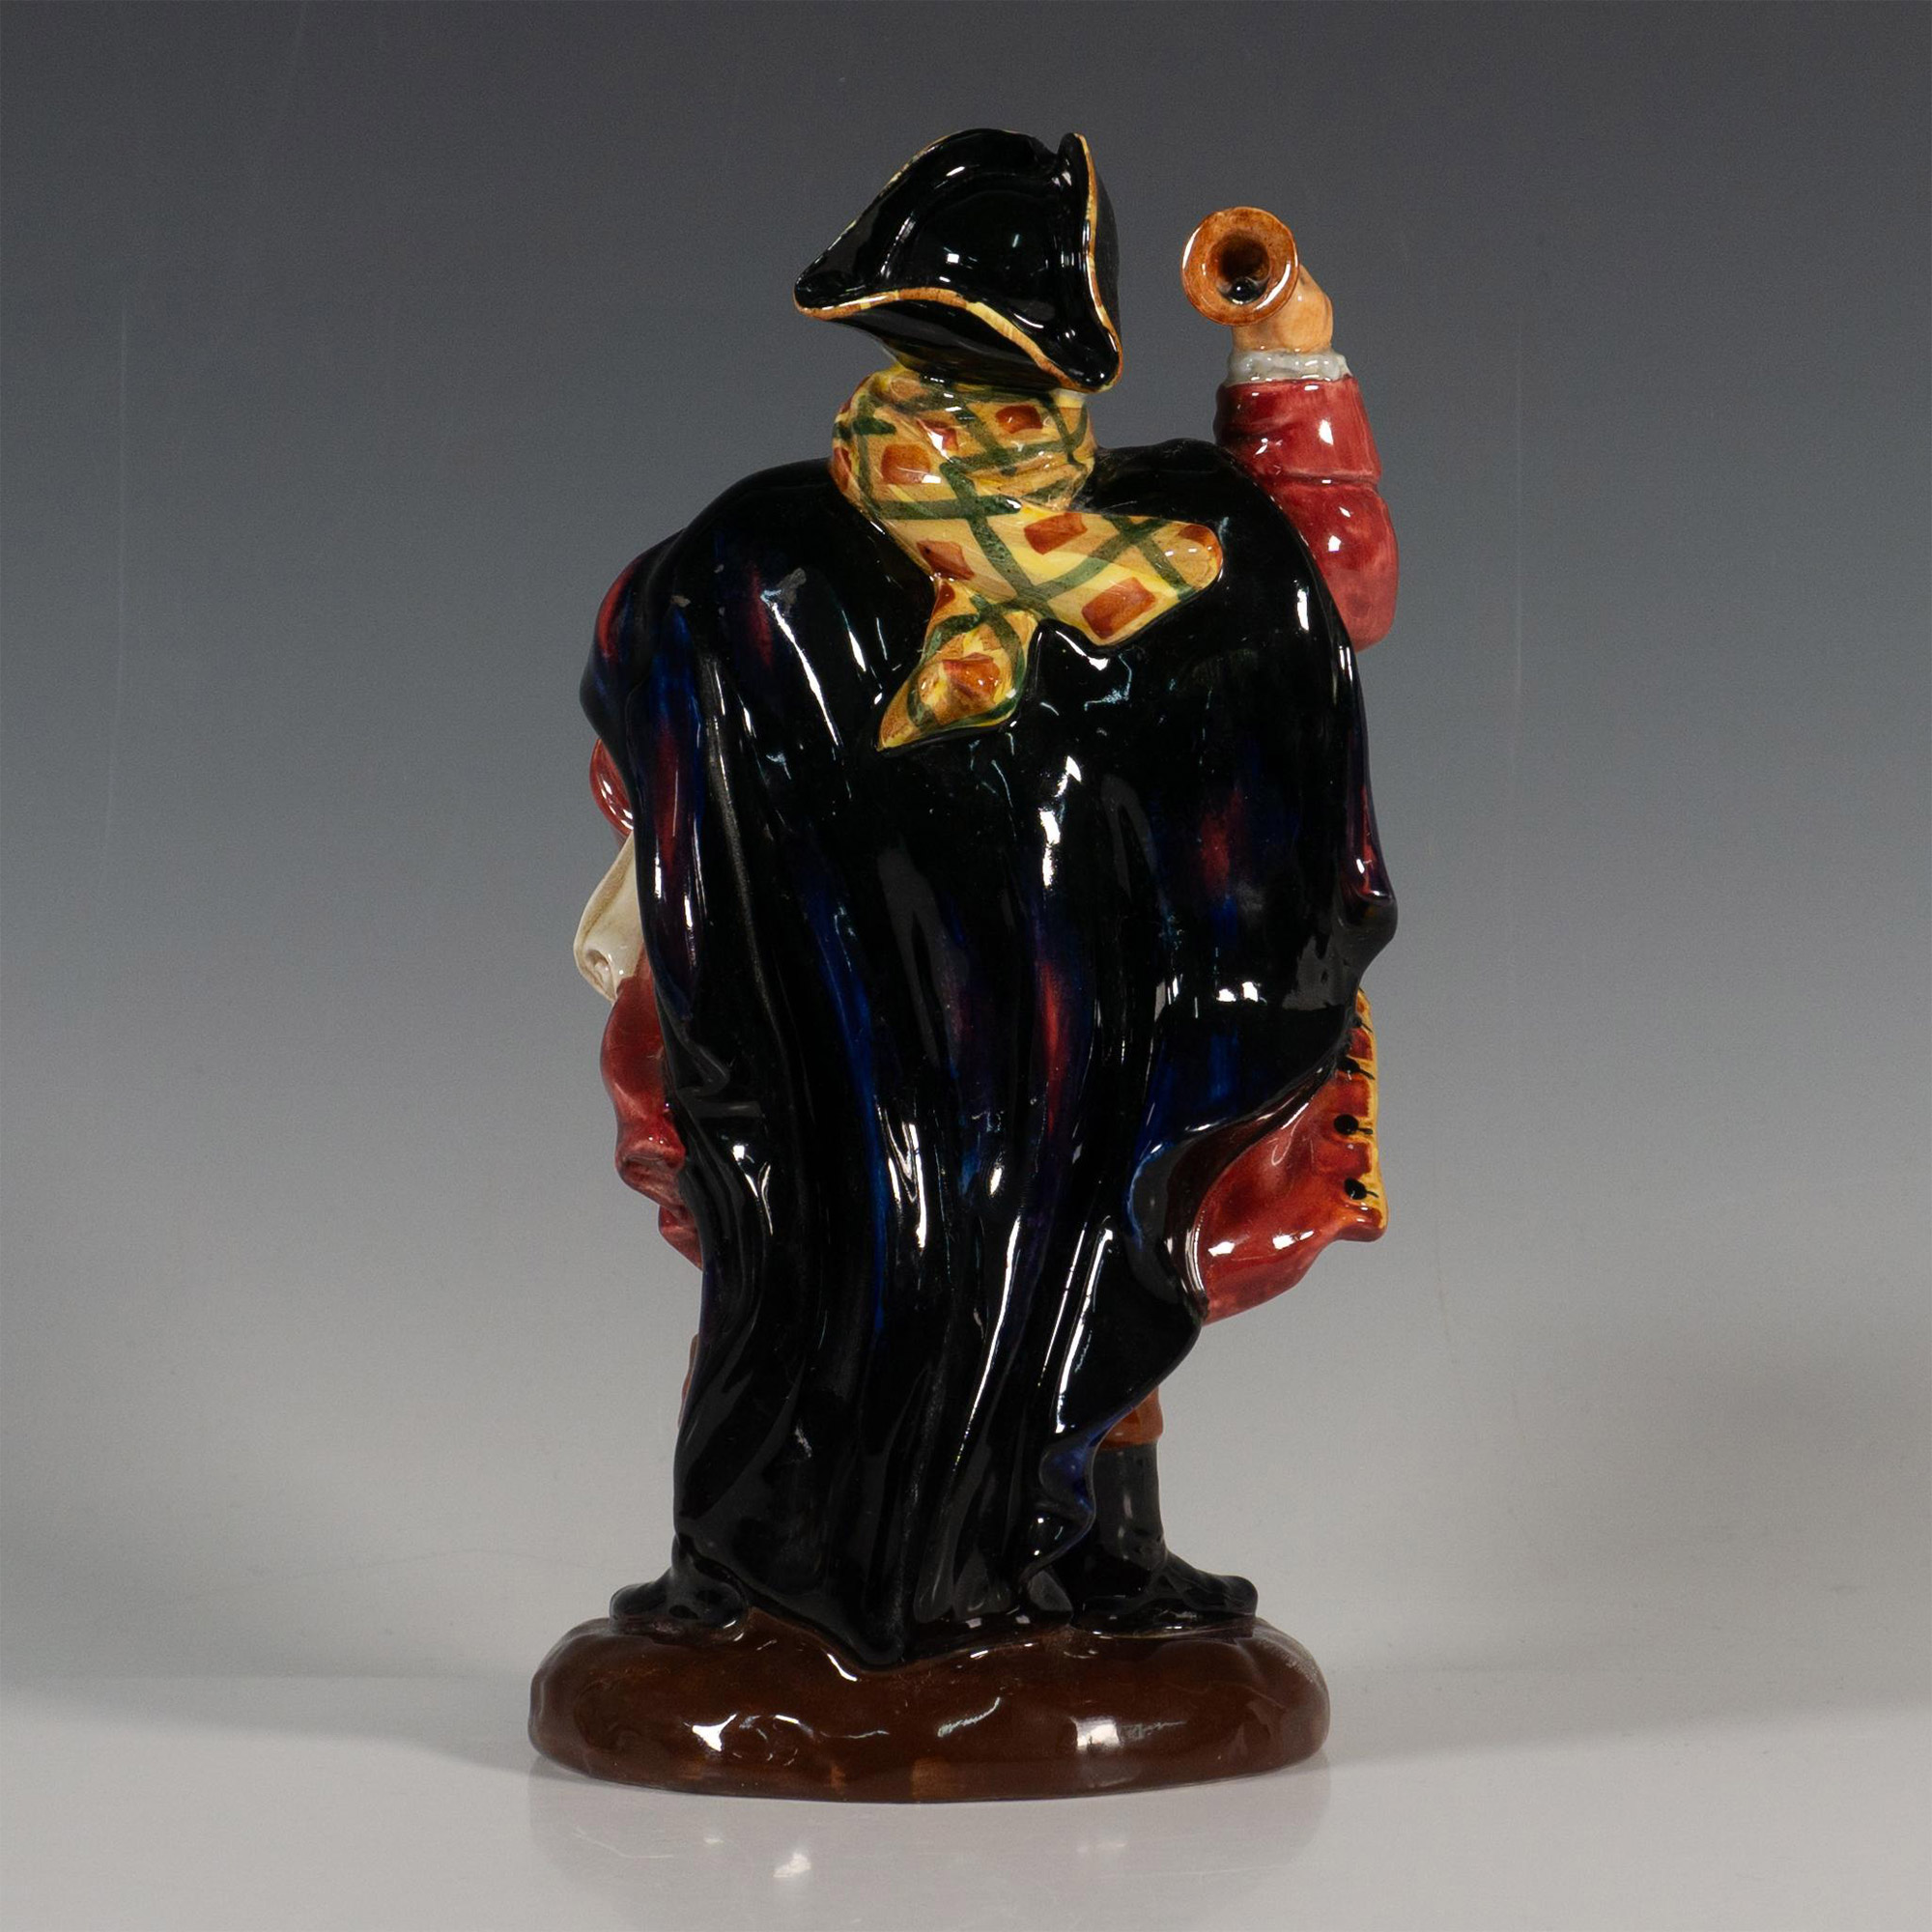 Town Crier HN2119 - Royal Doulton Figurine - Image 4 of 5